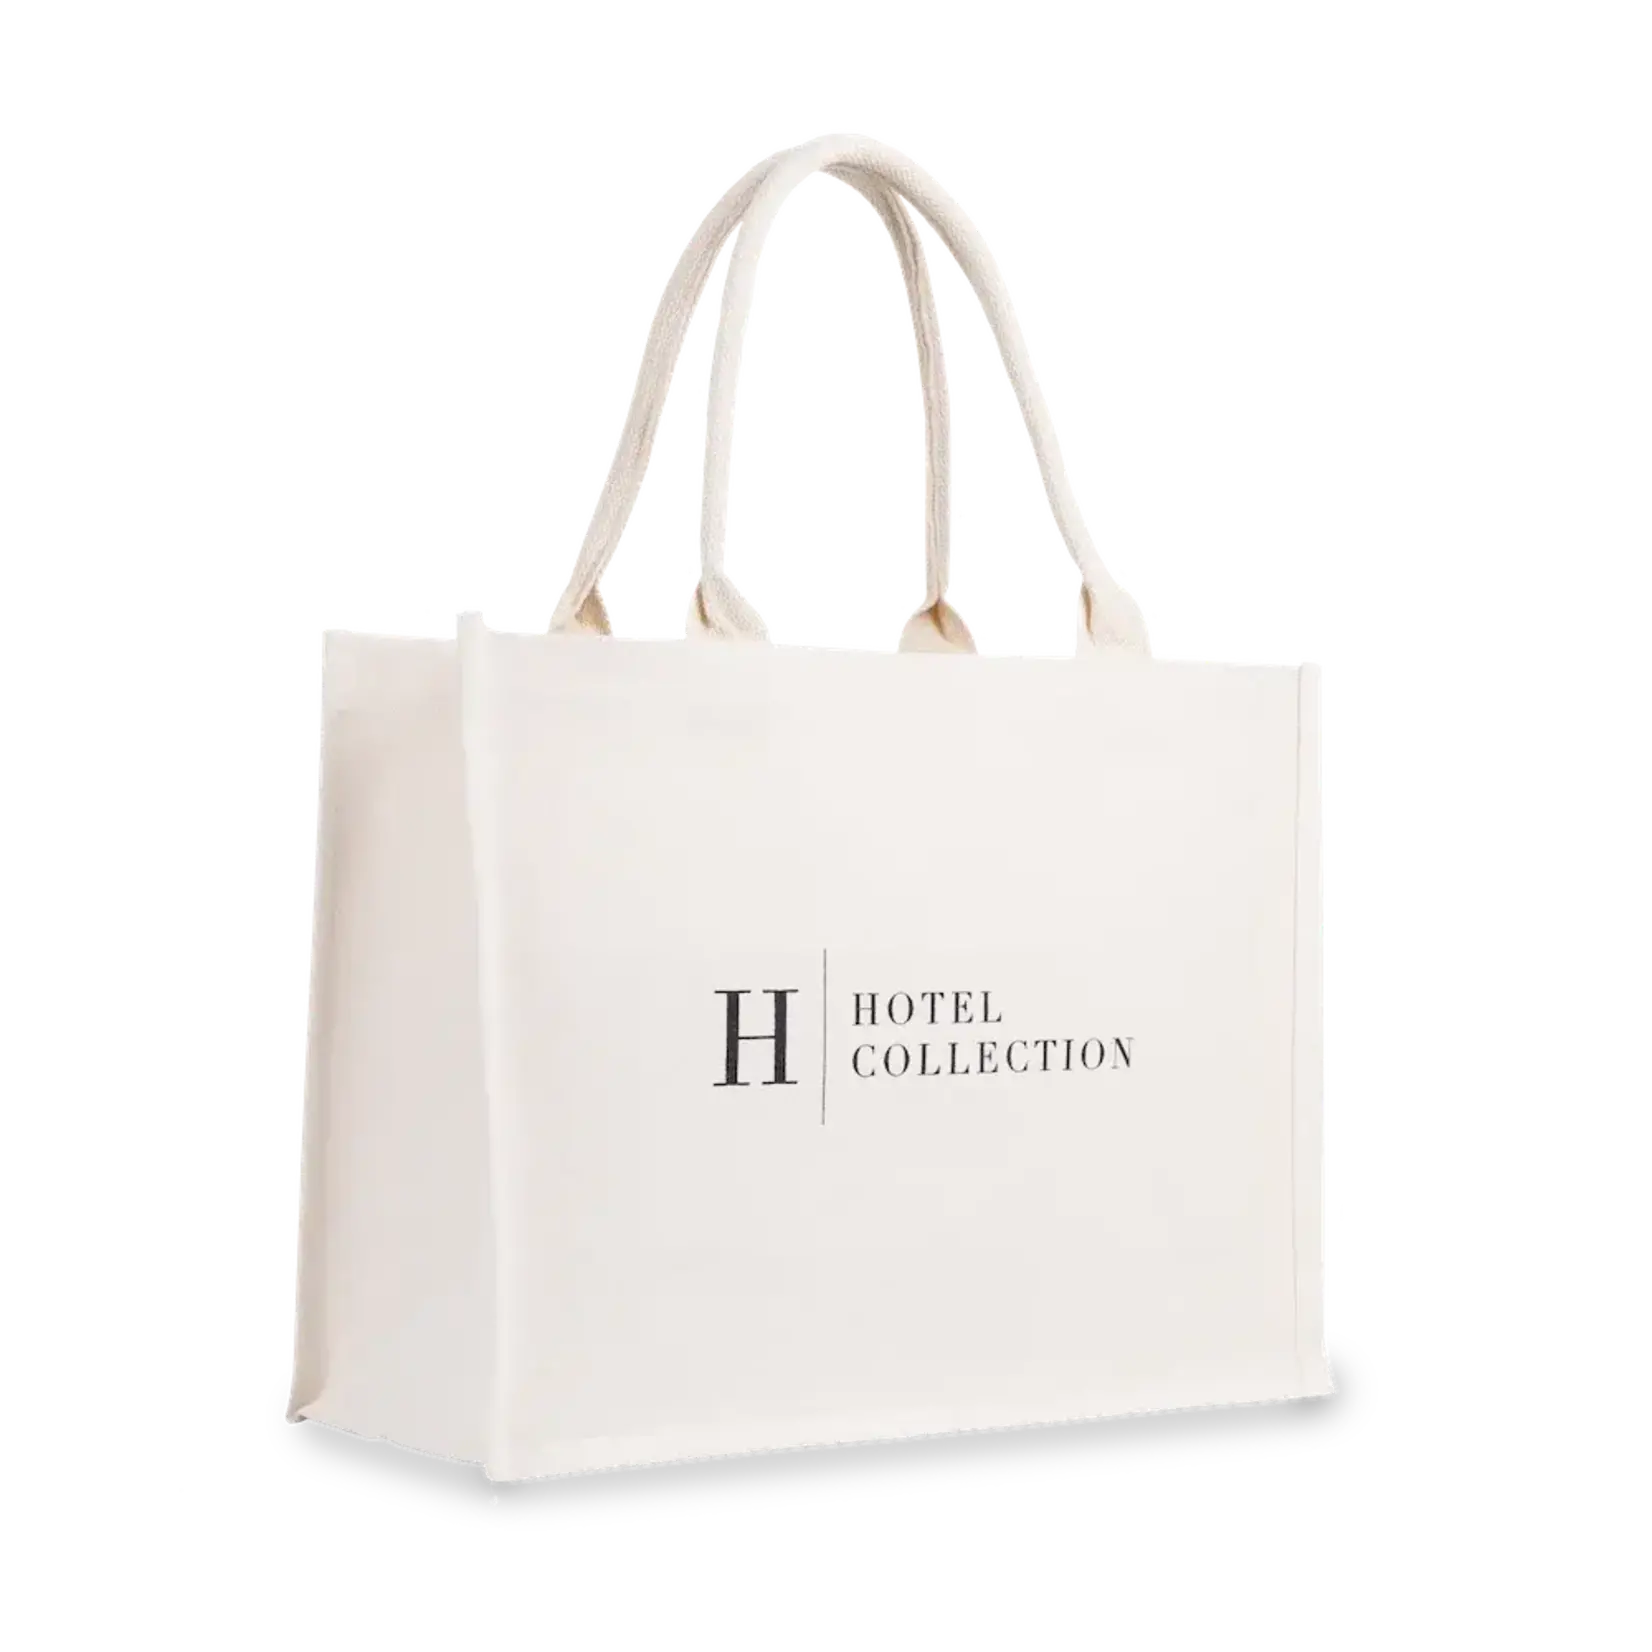 Hotel Collection Hotel Collection Tote Bag